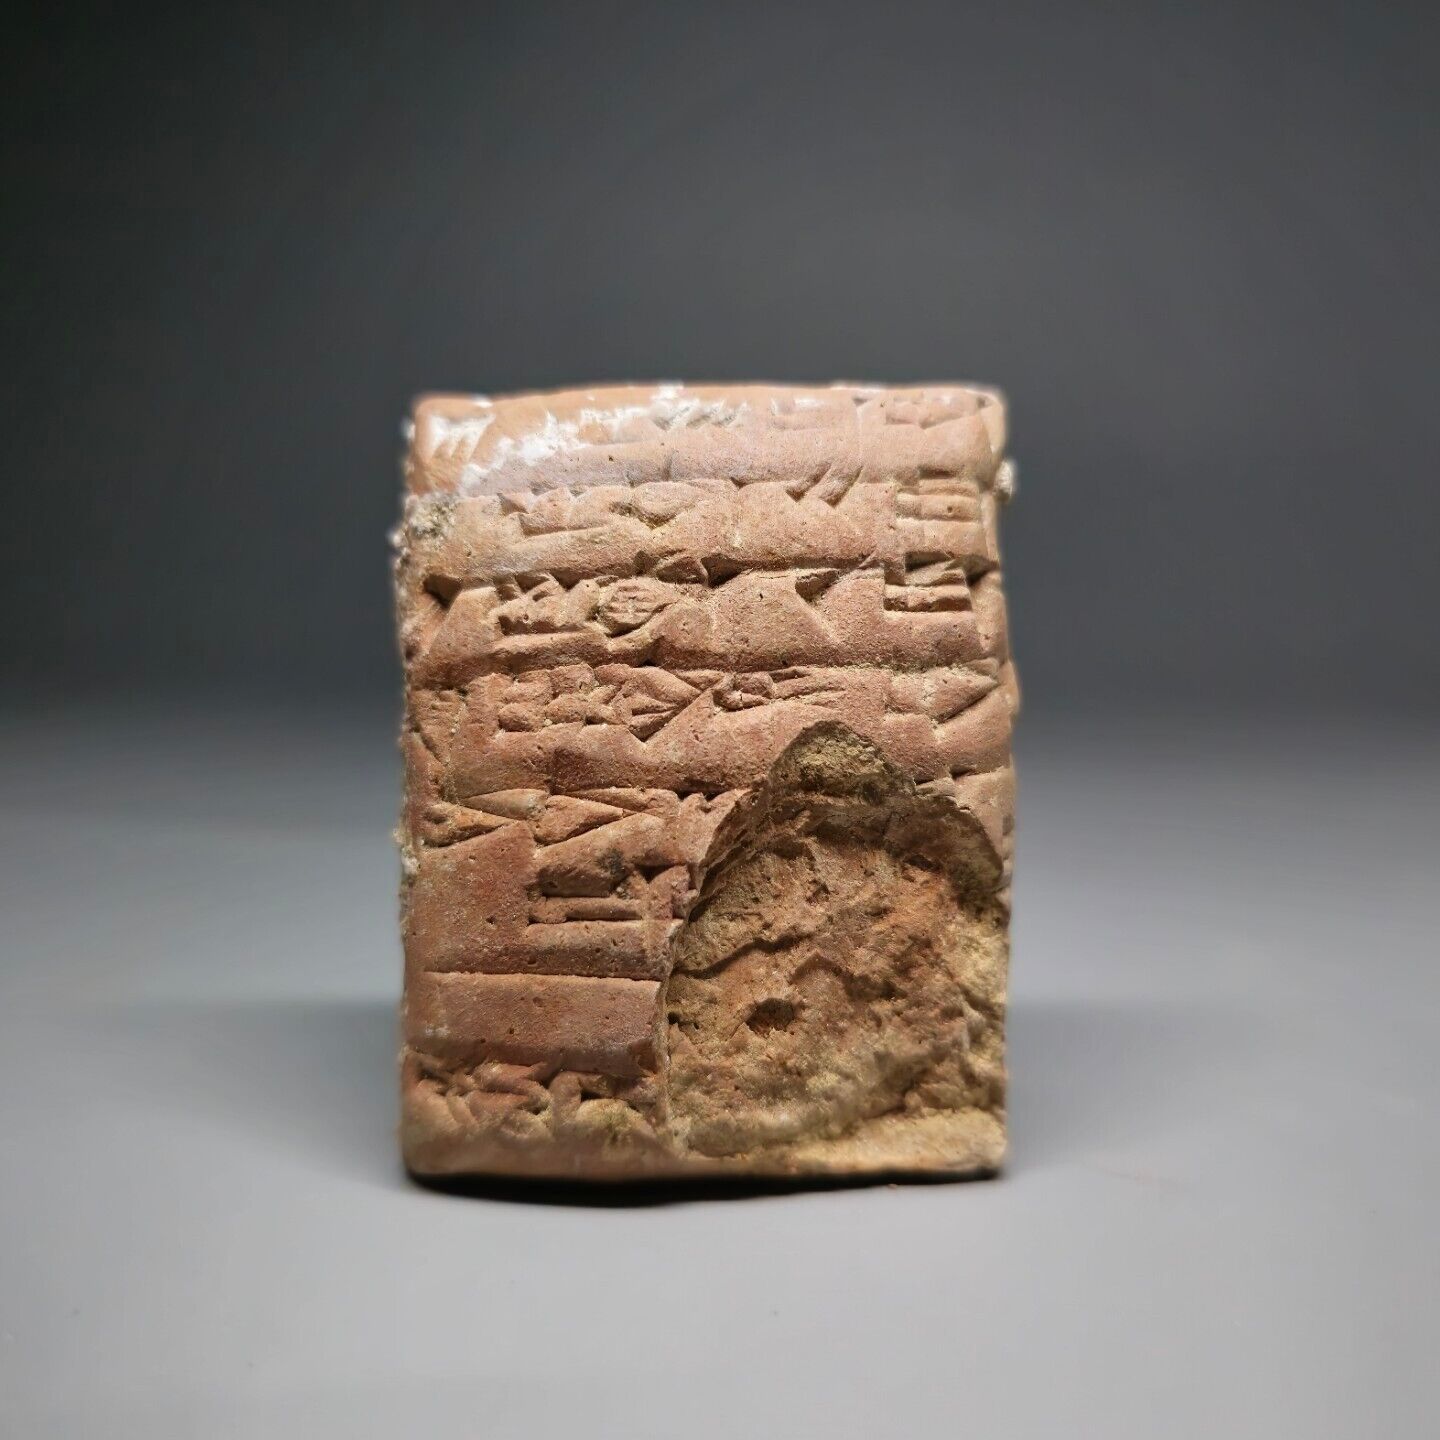 CIRCA NEAR EASTERN CUNEIFORM CLAY TABLET WITH EARLY FORM OF WRITINGS.